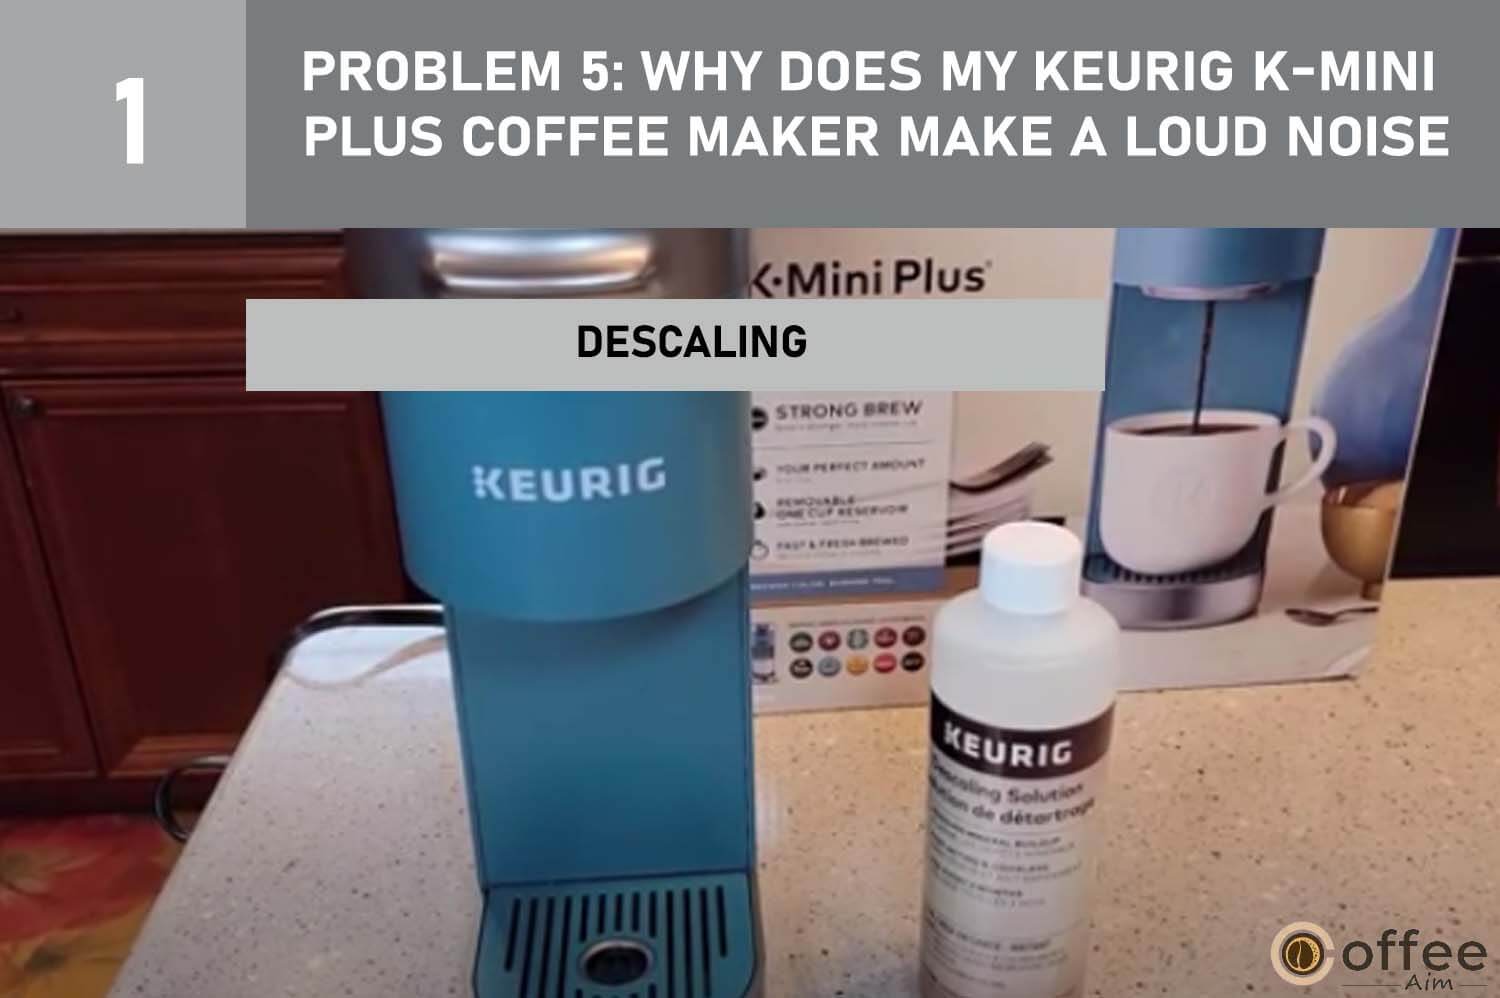 This image depicts the "Descaling" process as a solution to Problem 5: "Why Does My Keurig K-Mini Plus Coffee Maker Make a Loud Noise?" in our article titled "Keurig K-Mini Plus Problems."




